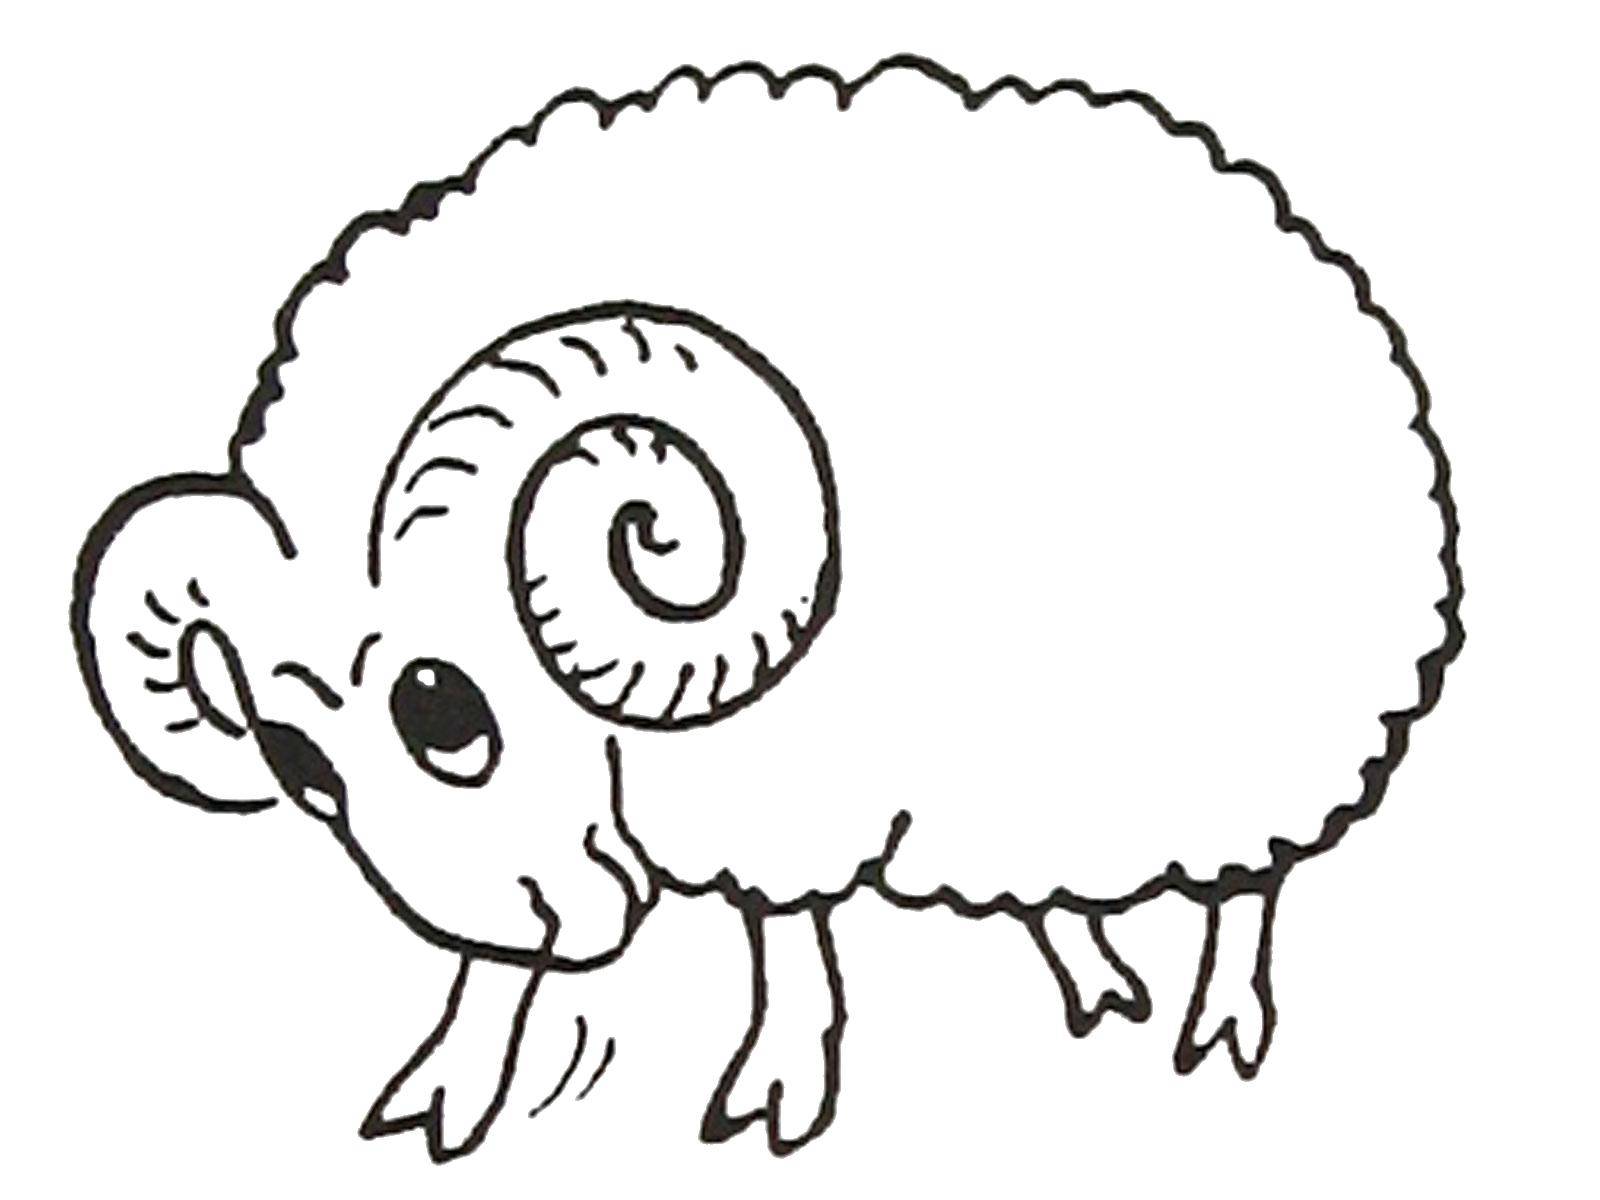 Coloring Sheep with large horns. Category Pets allowed. Tags:  Animals, lamb.